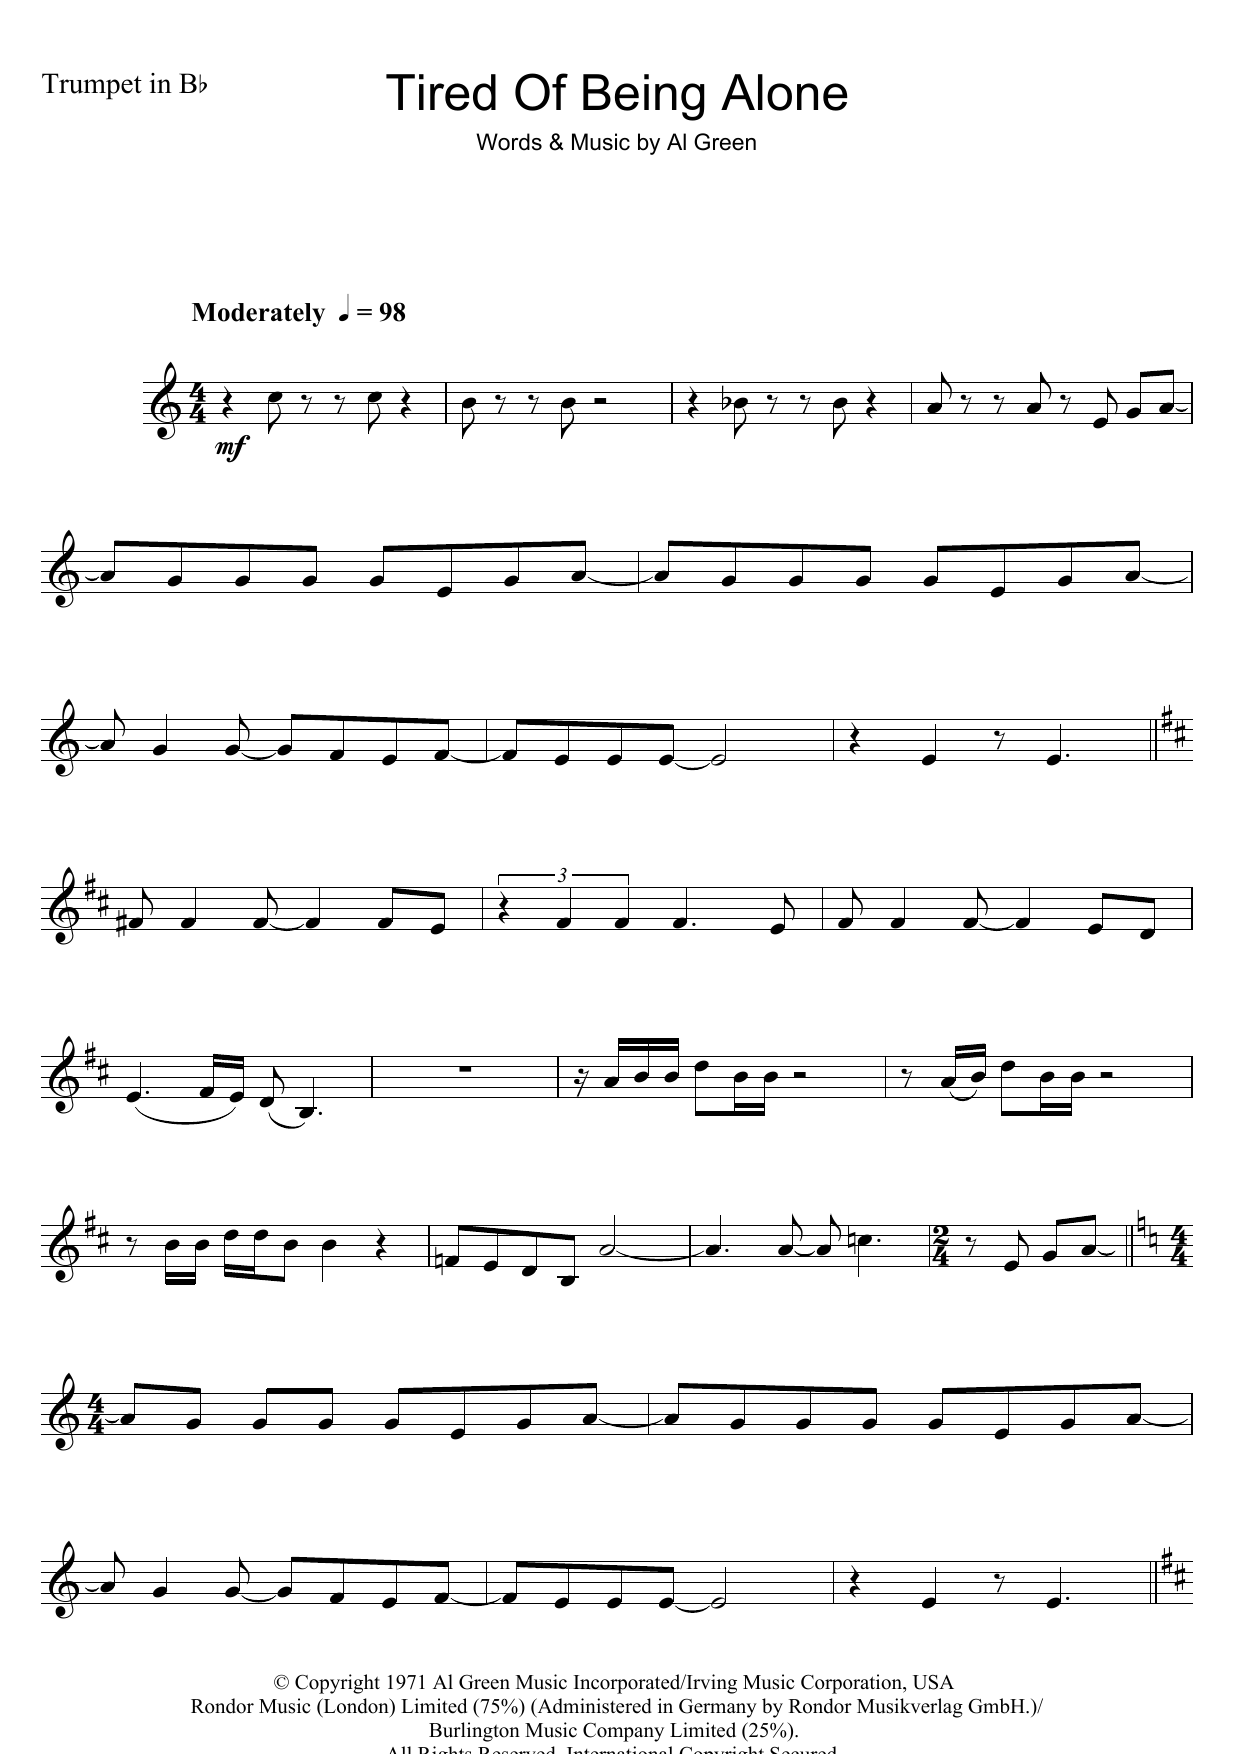 Download Al Green Tired Of Being Alone Sheet Music